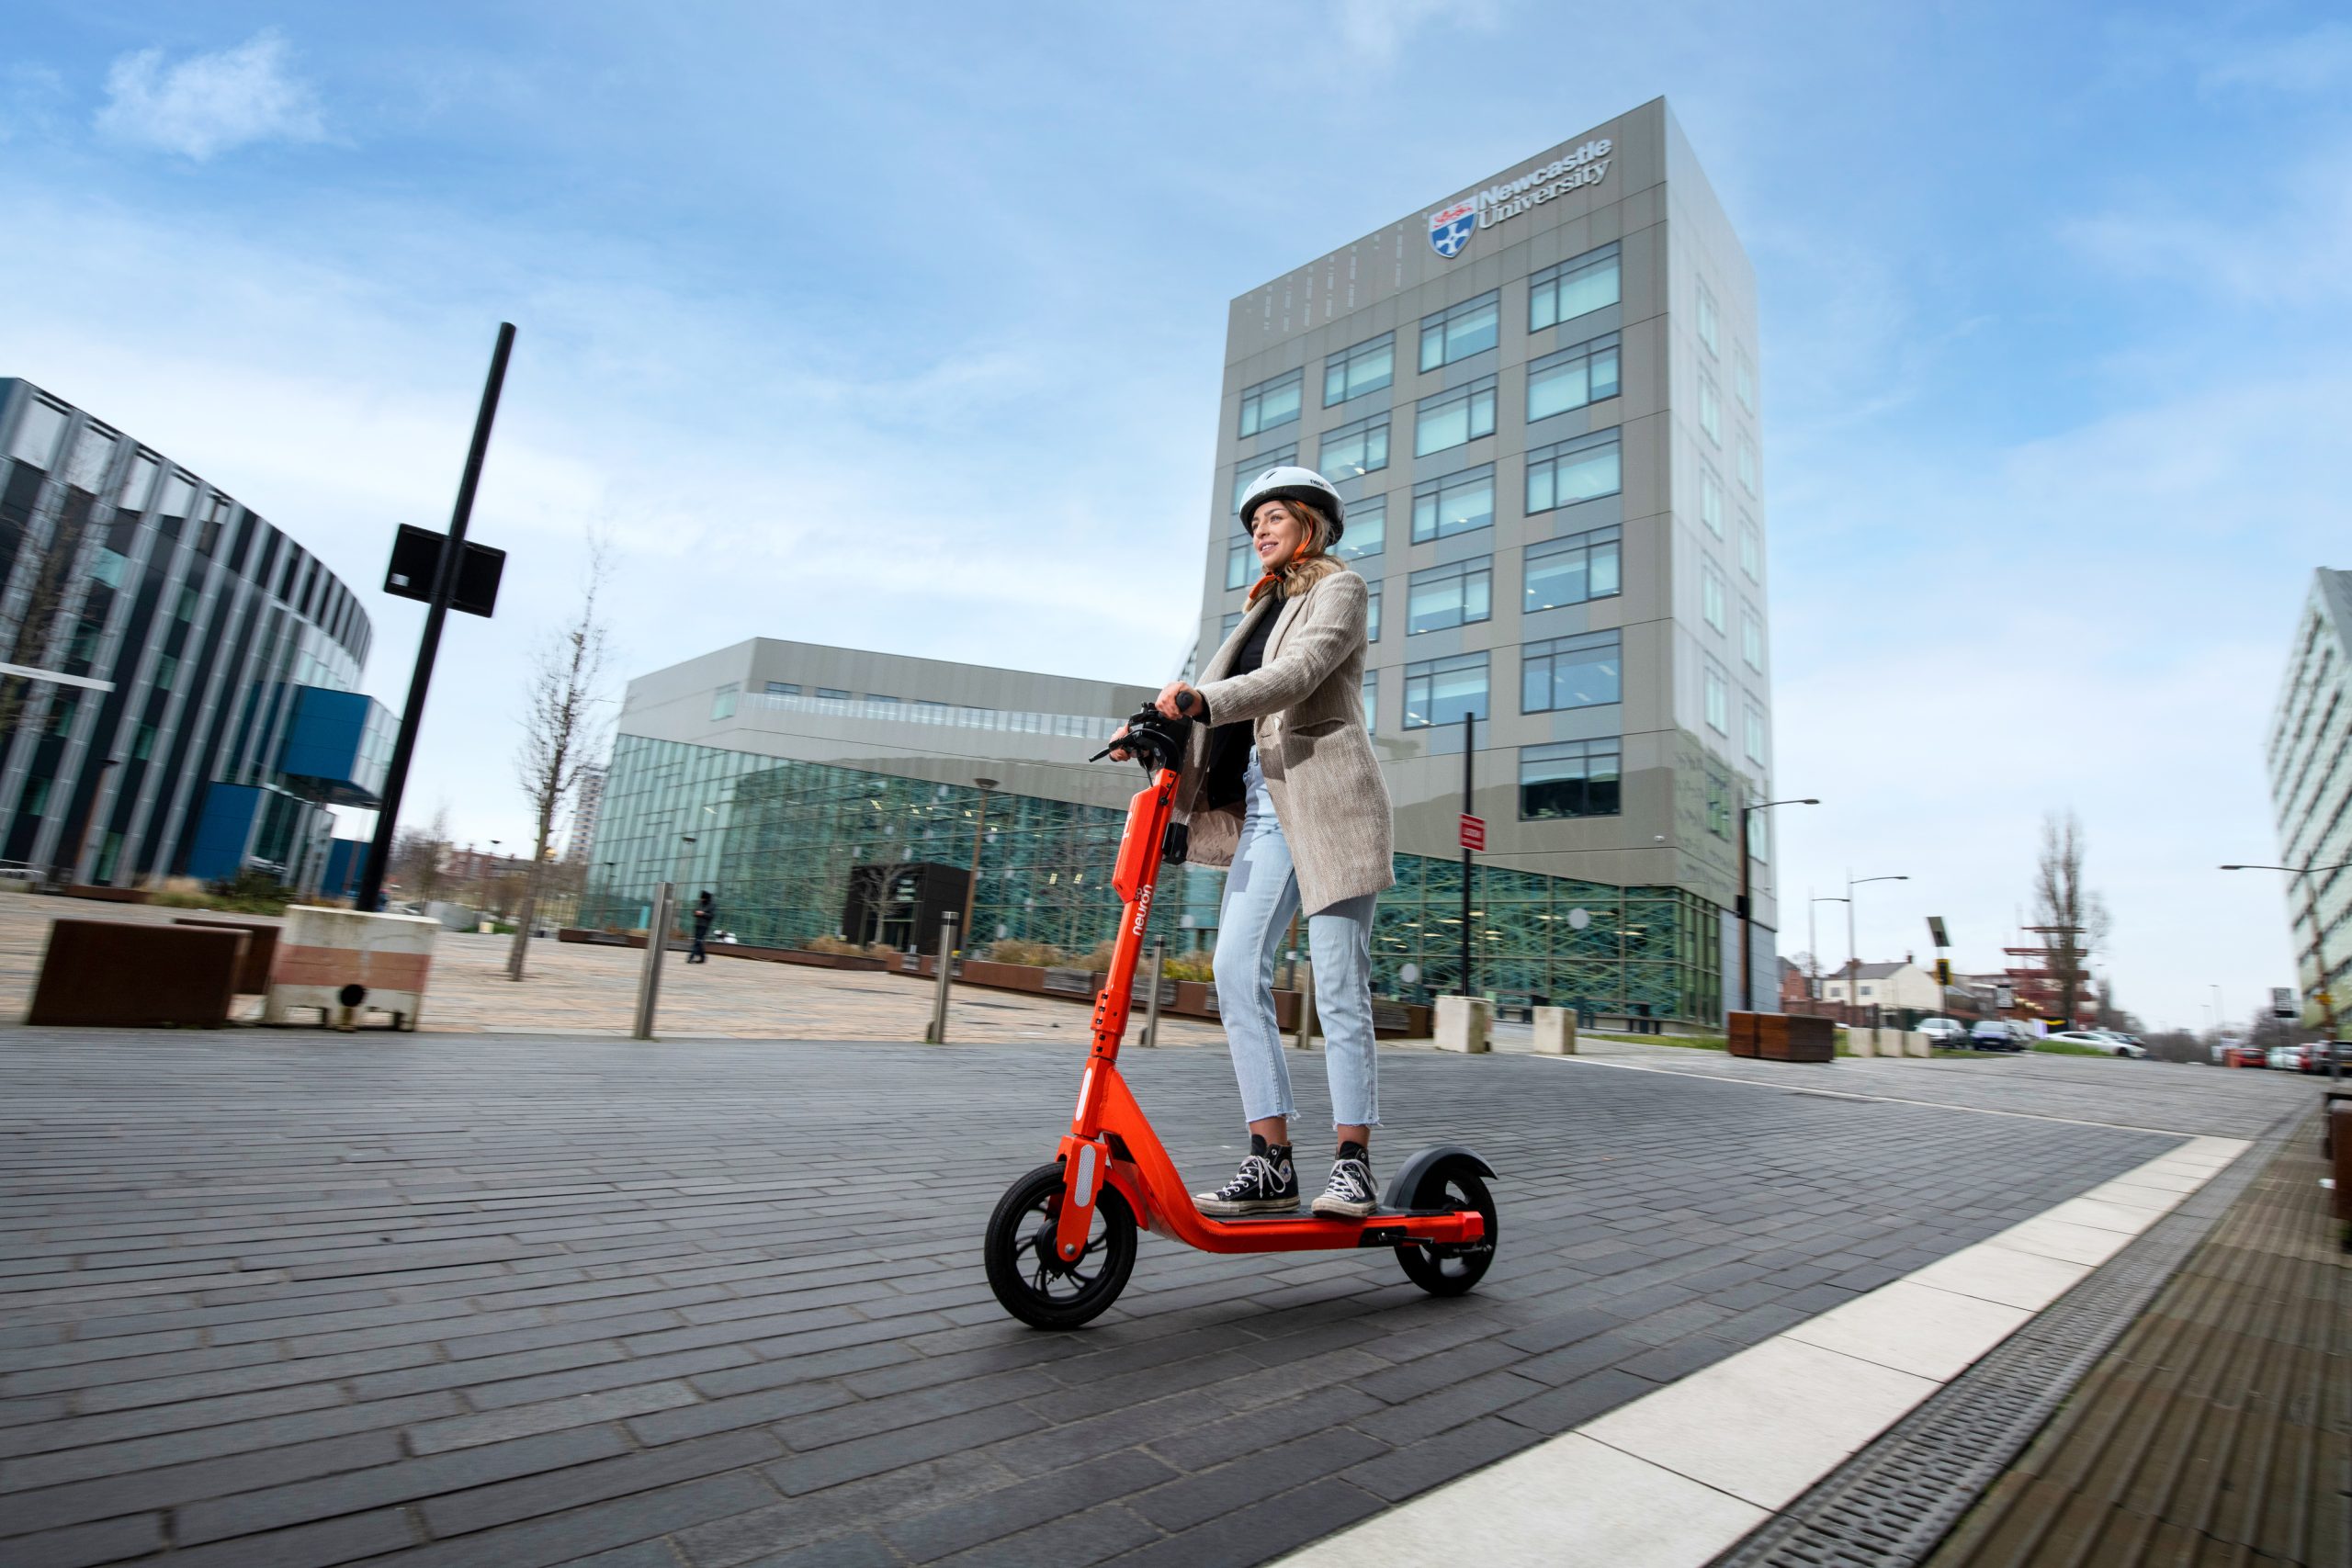 Ditching cars for Neuron e-scooters could save £3,000+ a year